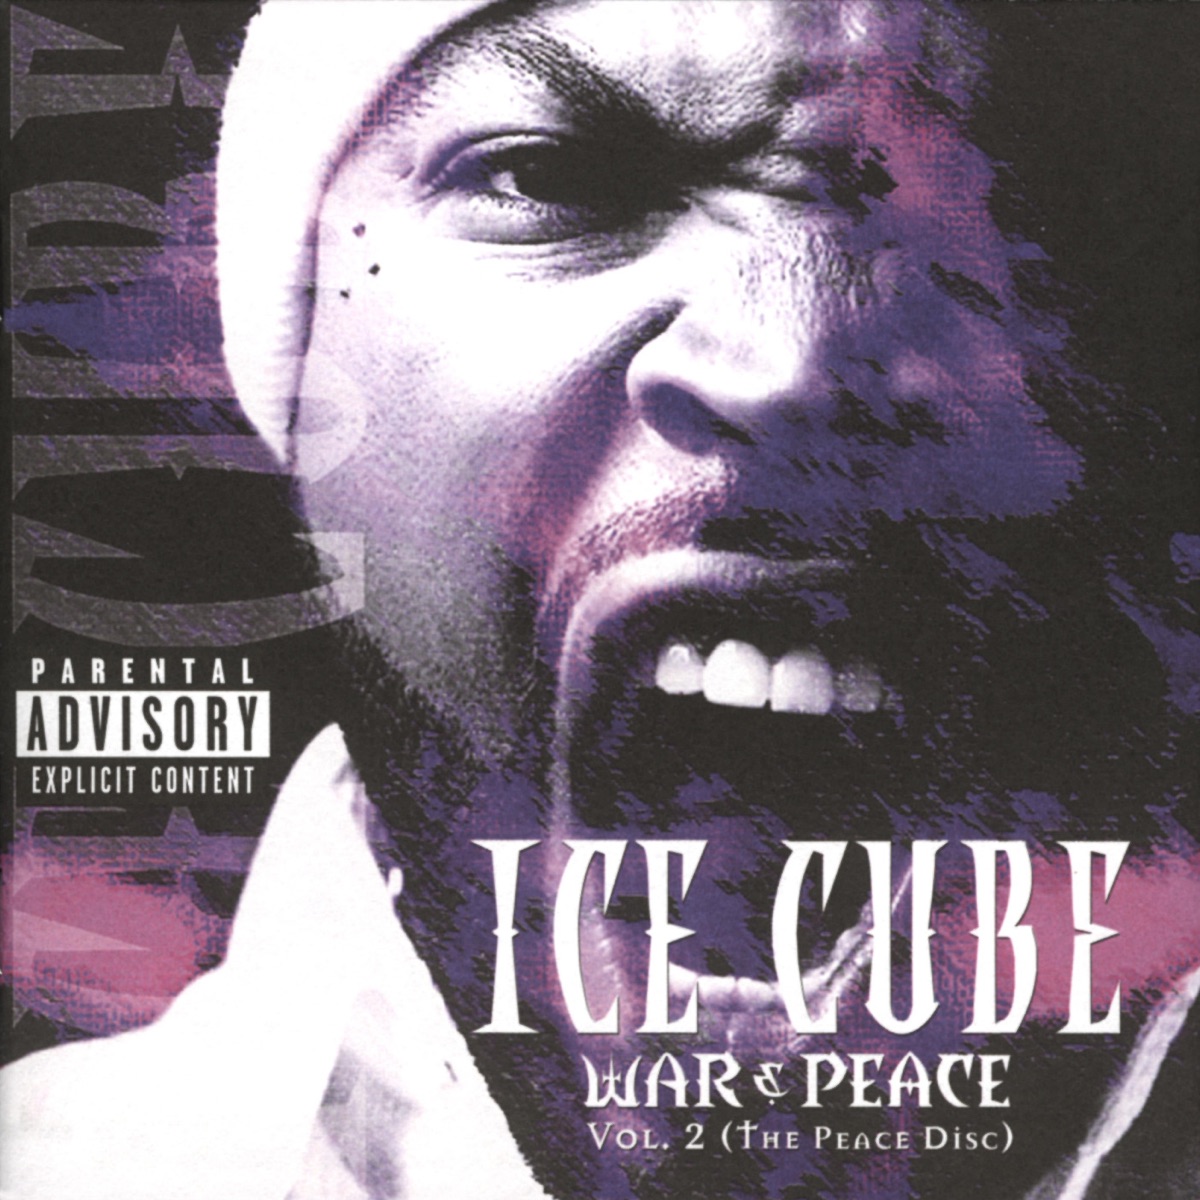 Raw Footage - Album by Ice Cube - Apple Music